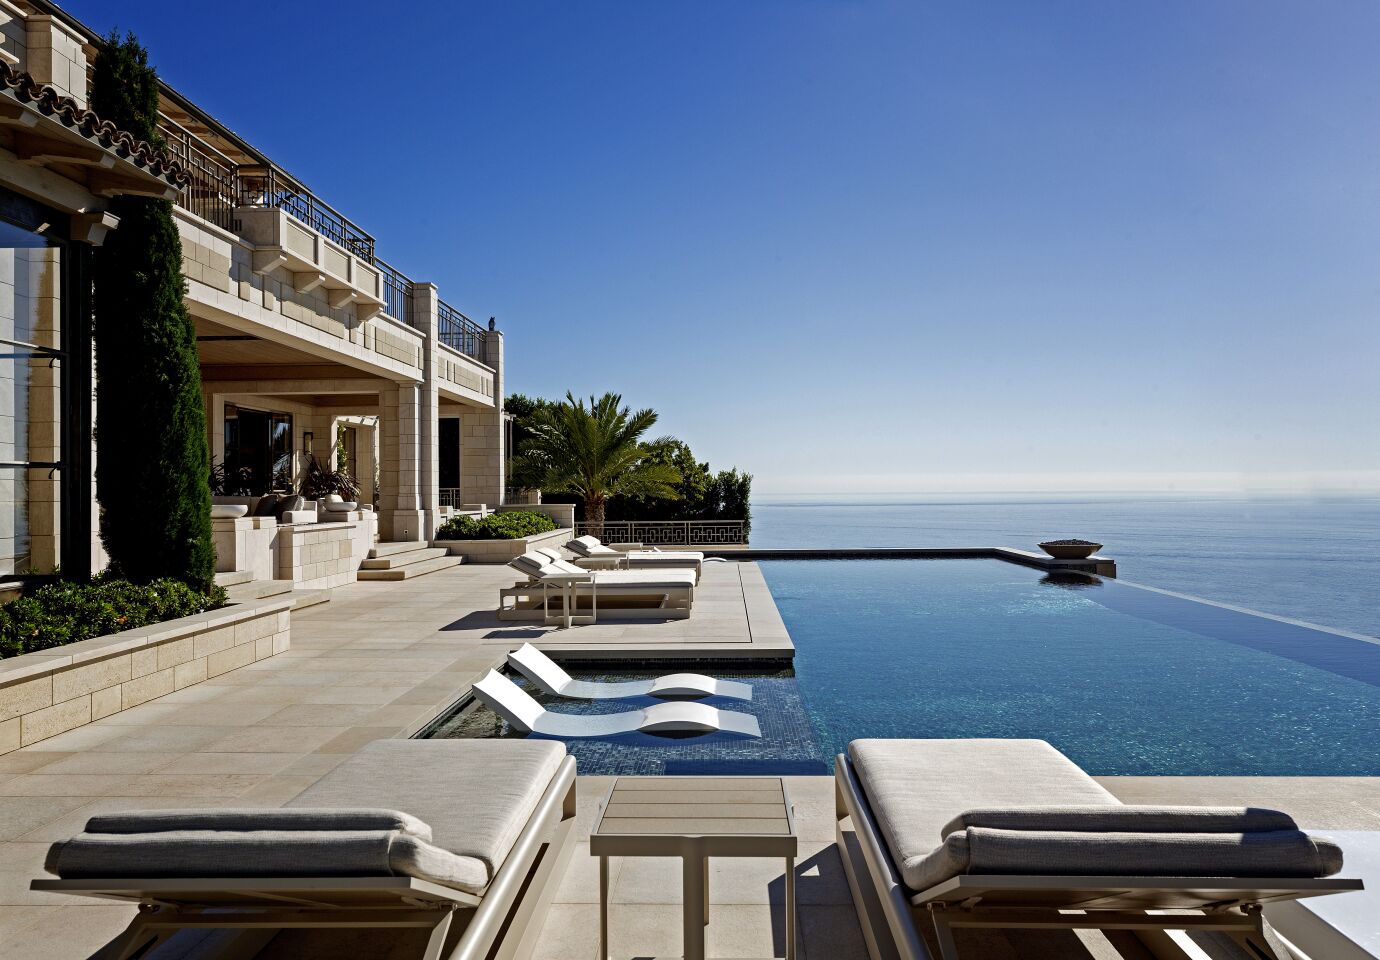 Exterior of mansion with deck, pool and view of the ocean.